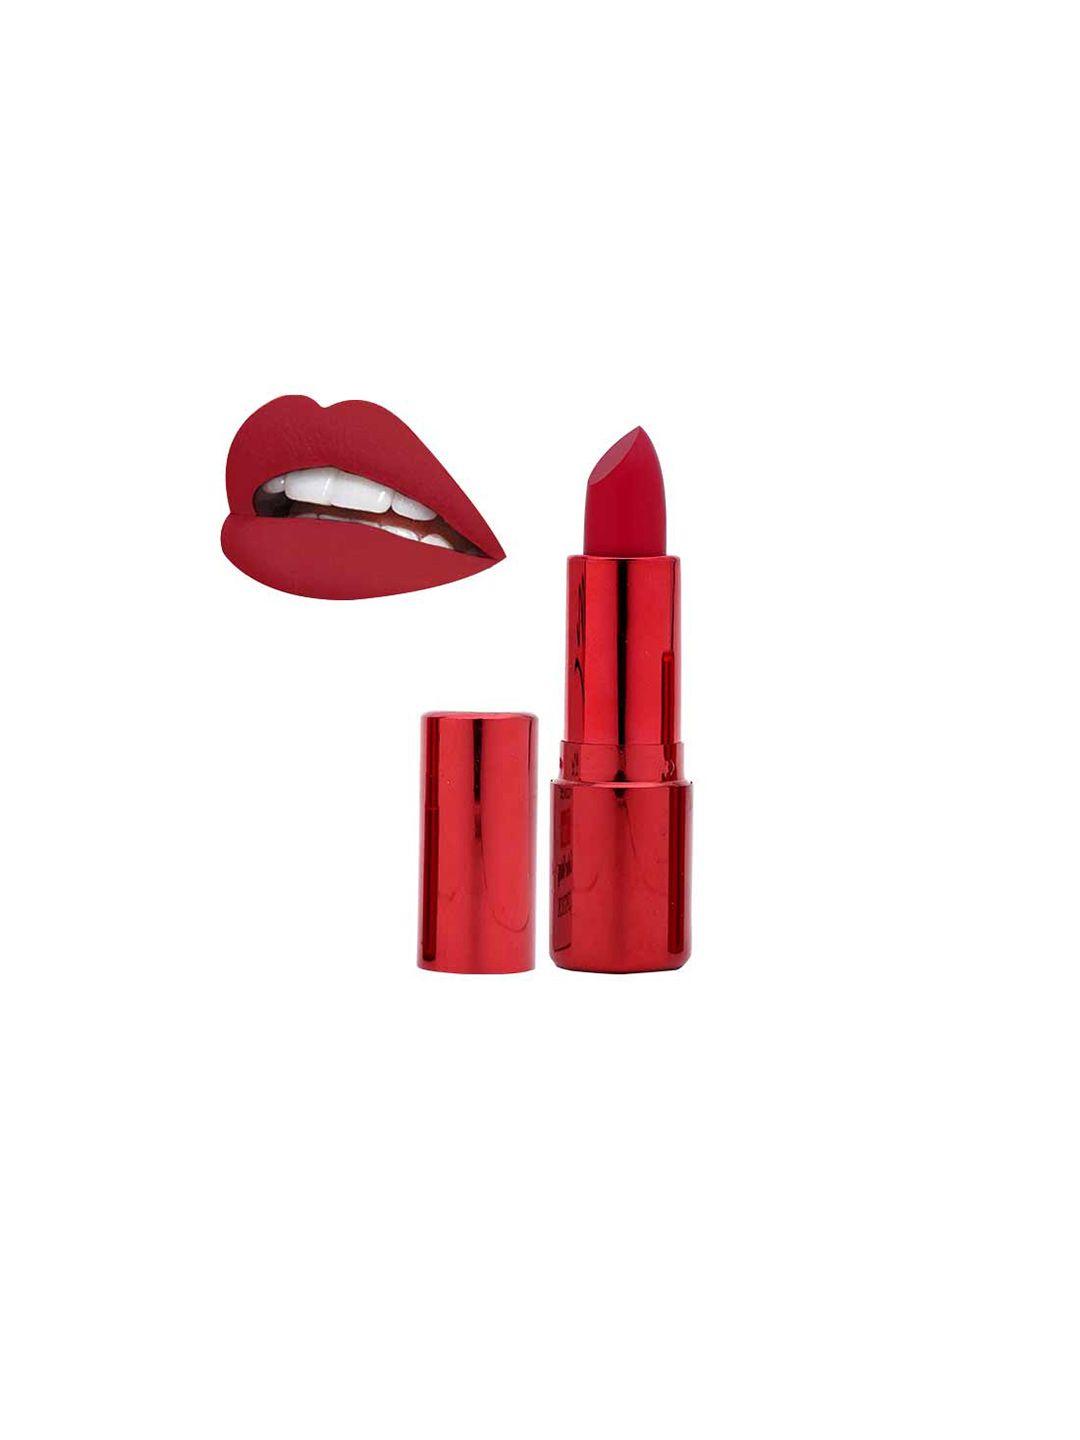 beautyrelay london 12 hour color stay lipstick with vitamin c 3.5g - truly maroon